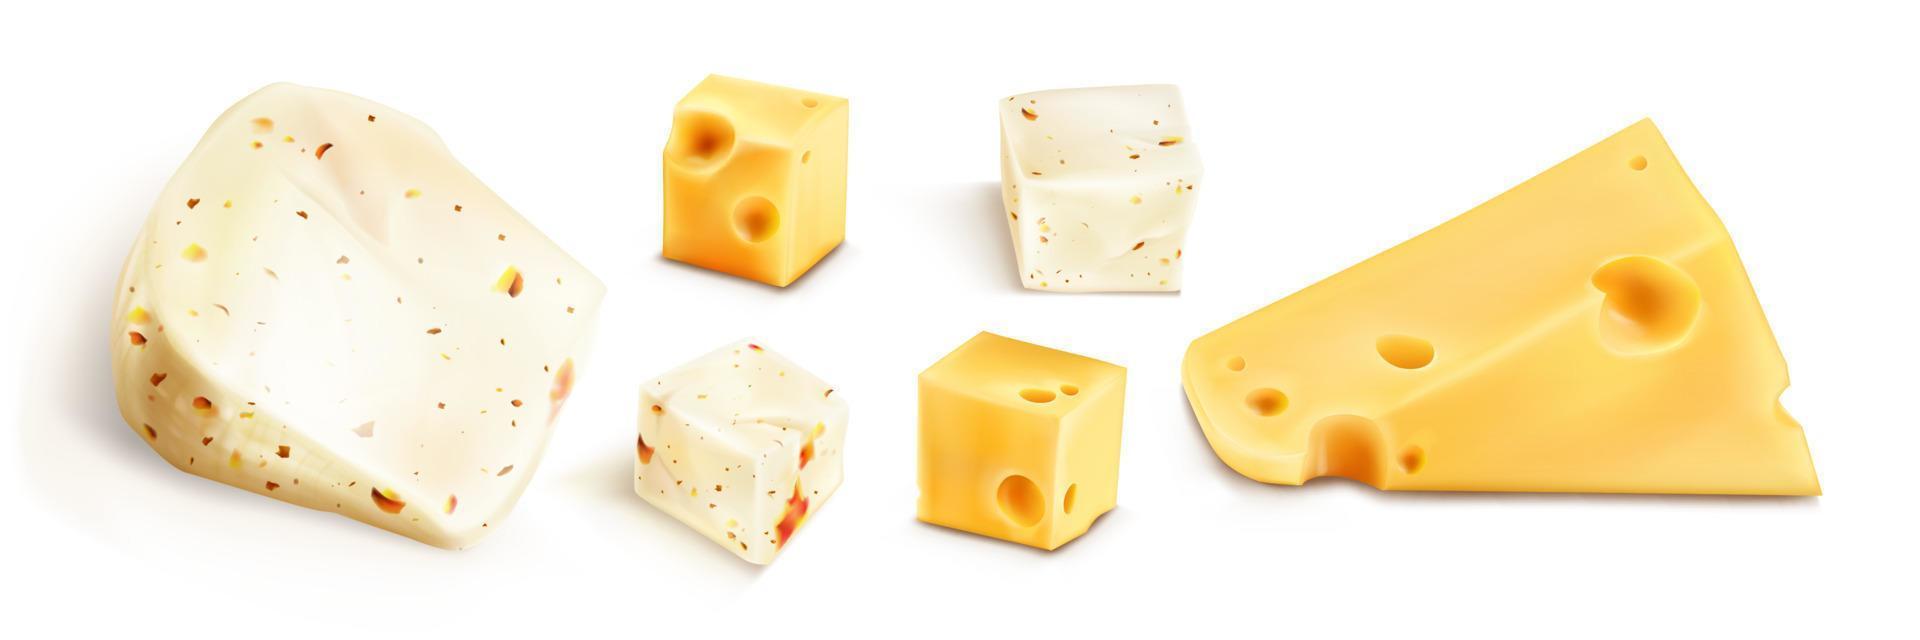 Fresh cheese blocks with spices vector